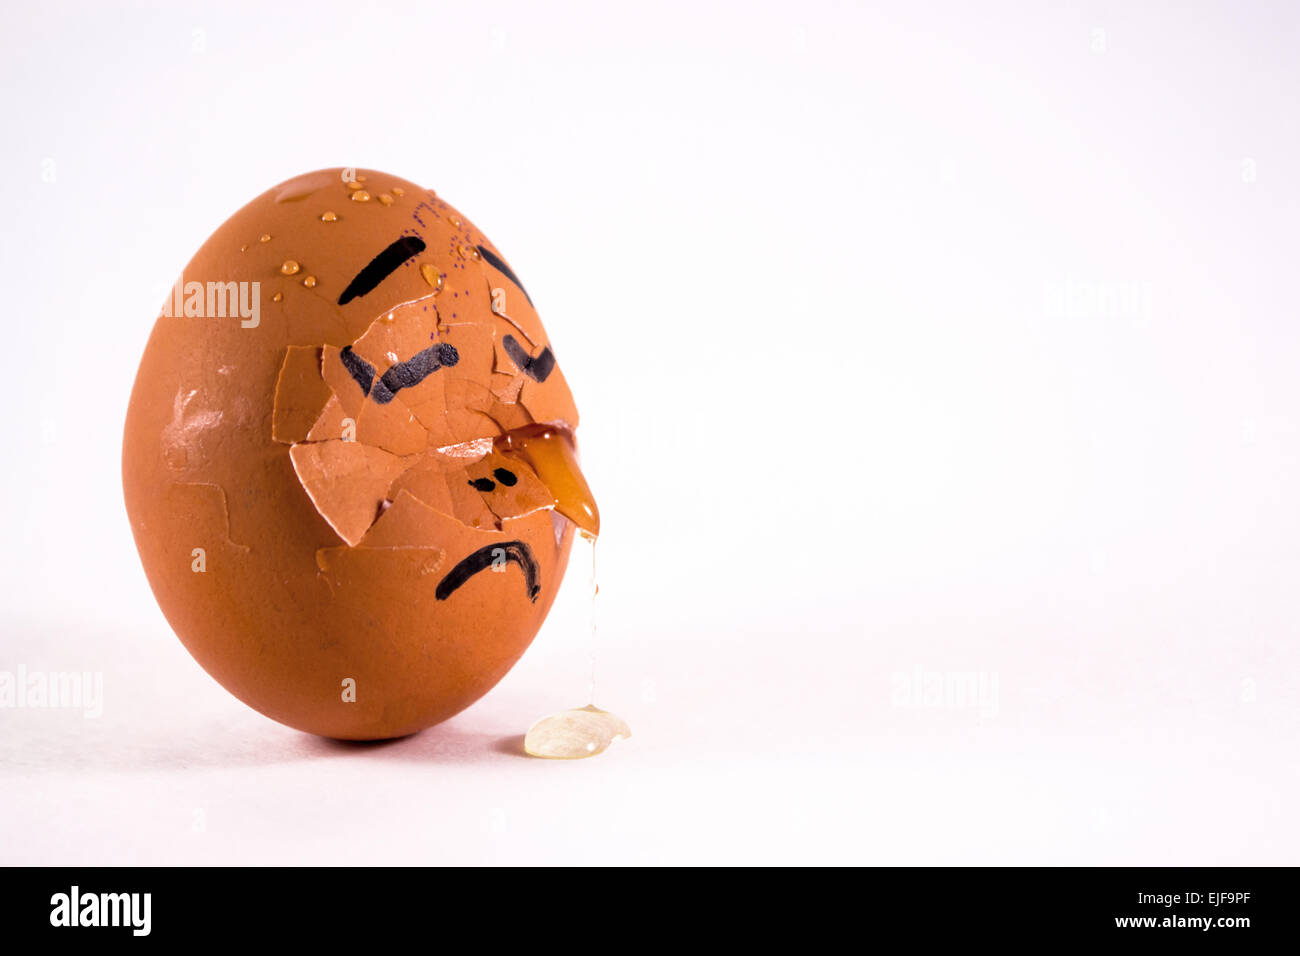 Egg On Face Stock Photos & Egg On Face Stock Images - Alamy